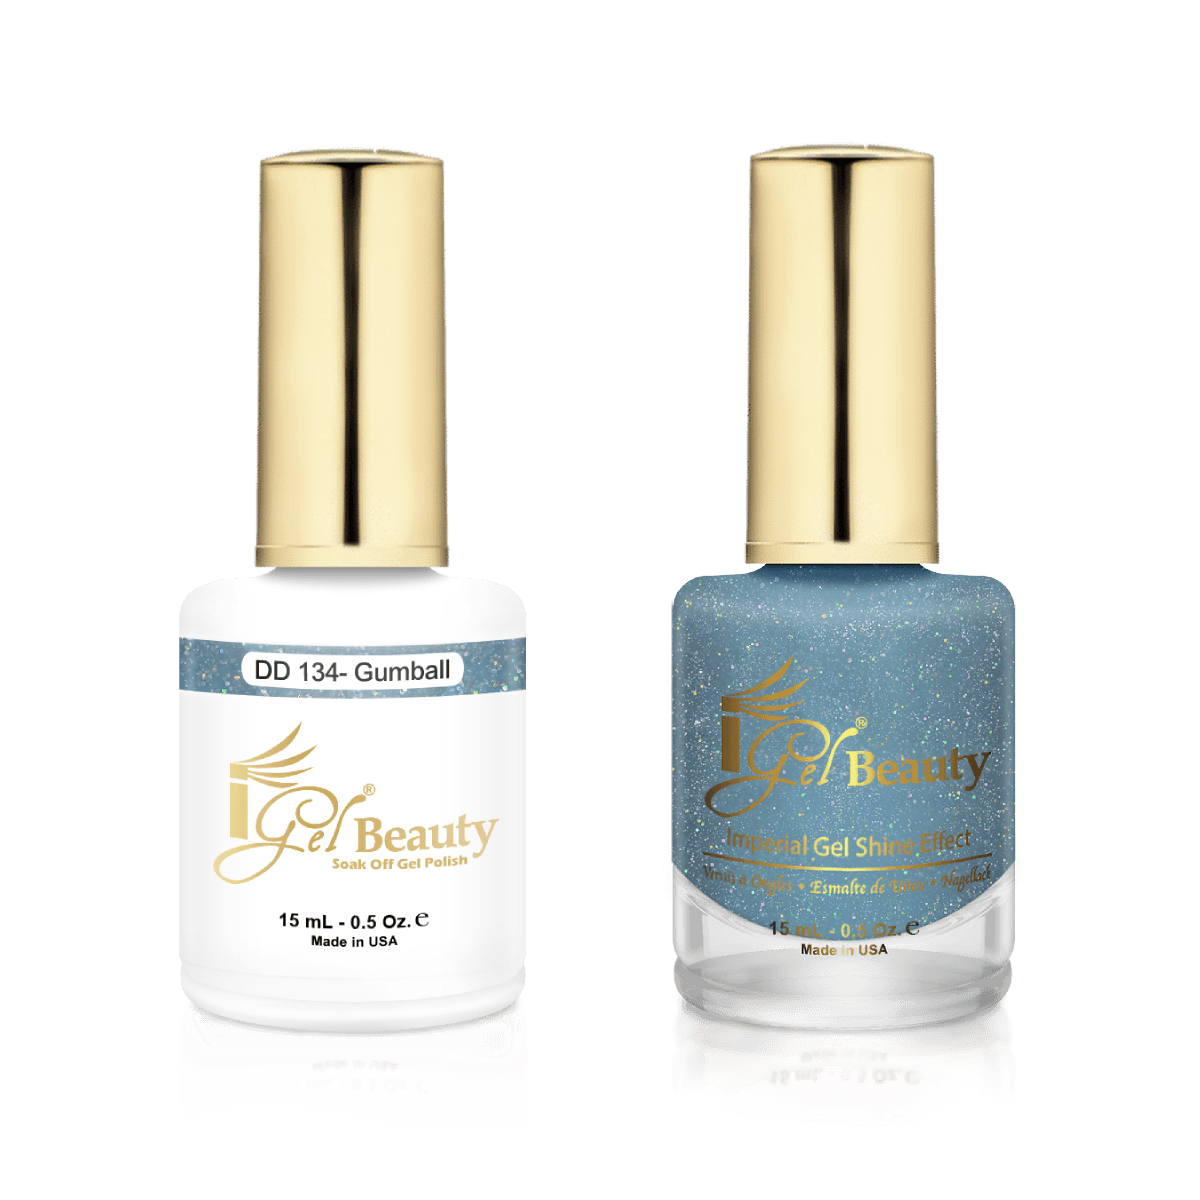 IGel Duo Gel Polish + Matching Nail Lacquer DD 134 GUMBALL